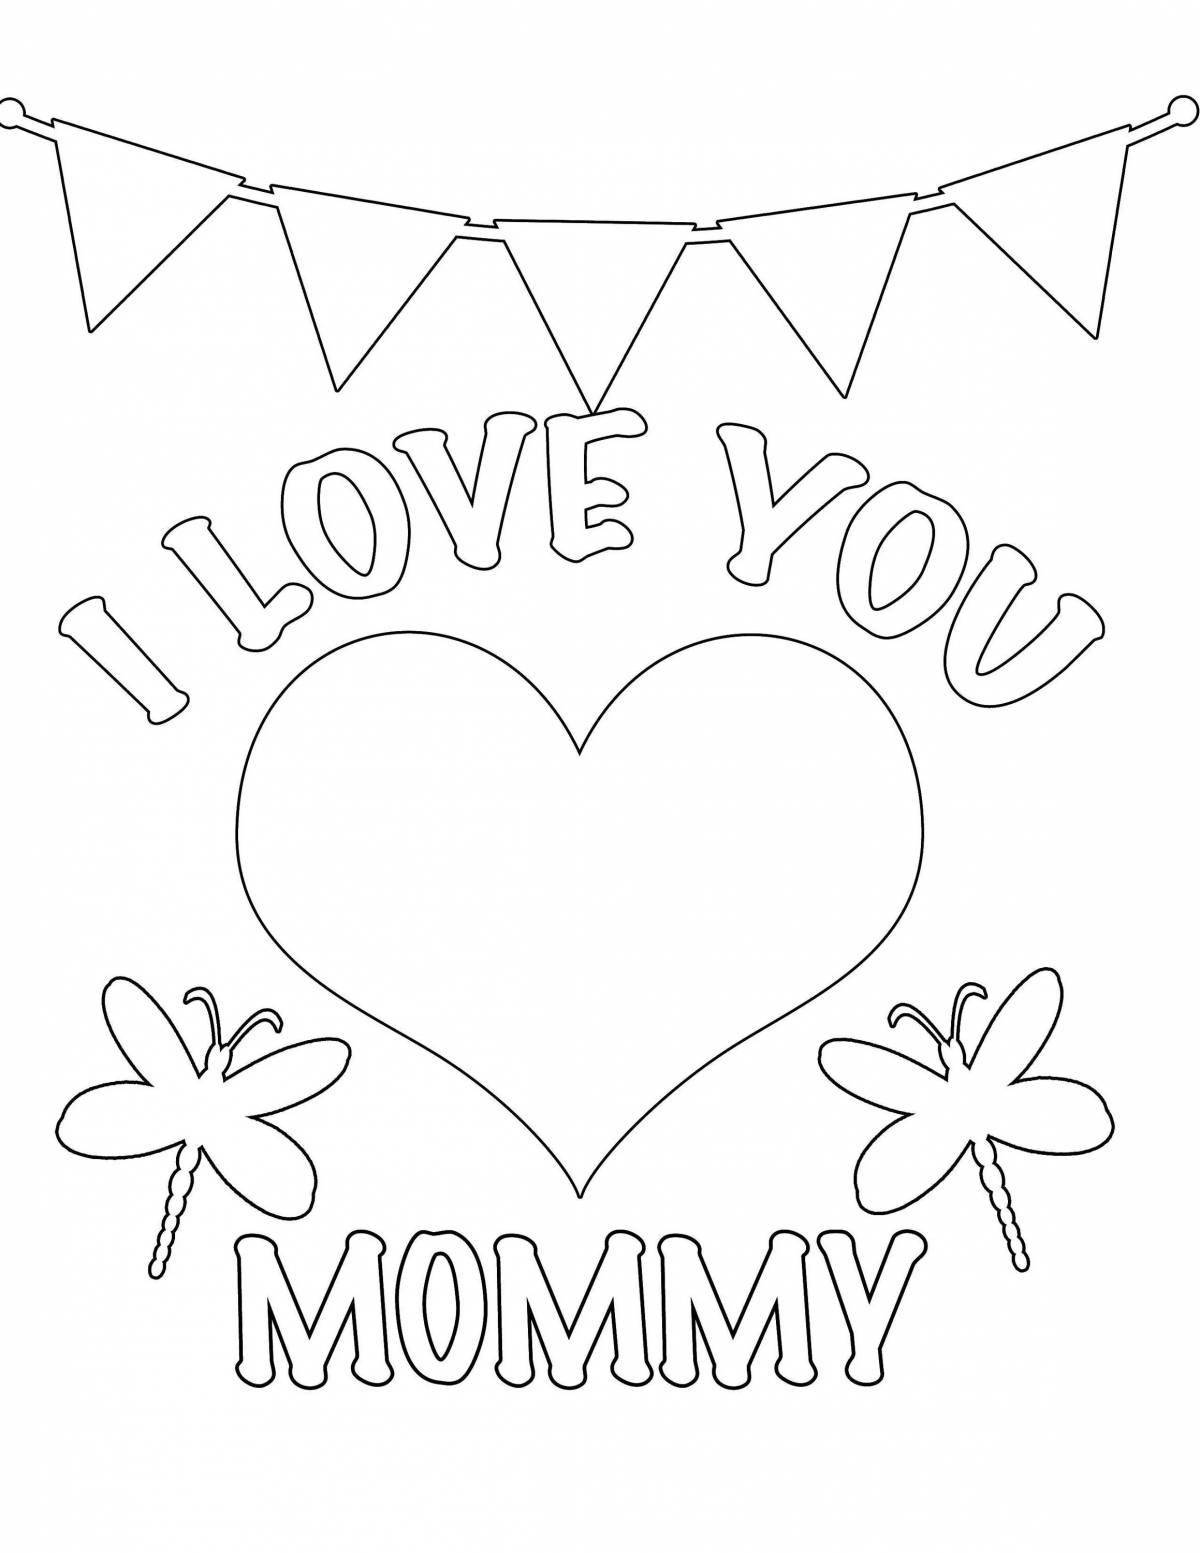 Coloring page exotic birthday present for mom